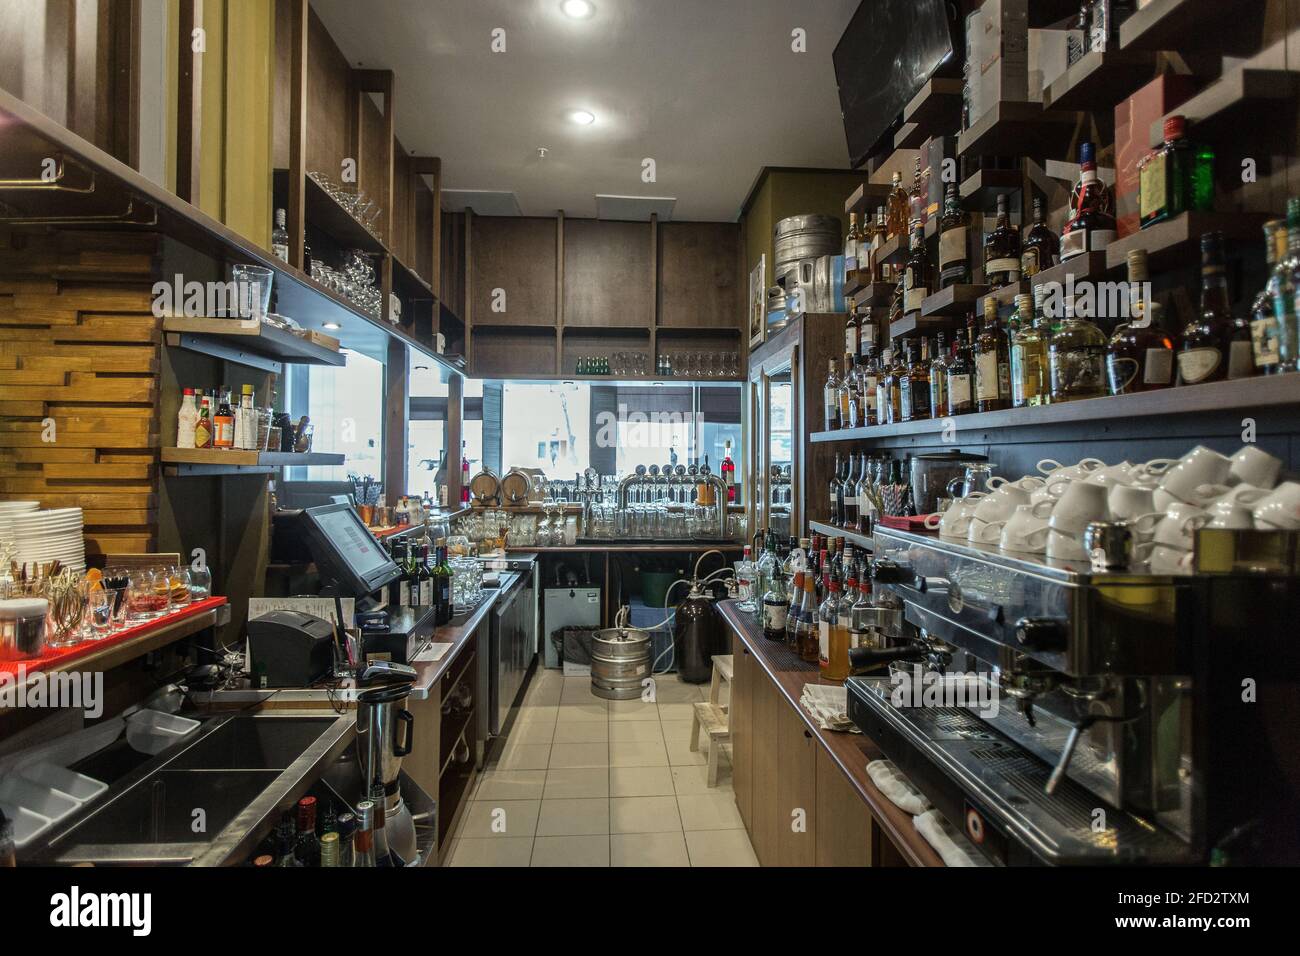 Perspective view of interior of coffee shop with assorted dishes and coffeemaker on counter Stock Photo